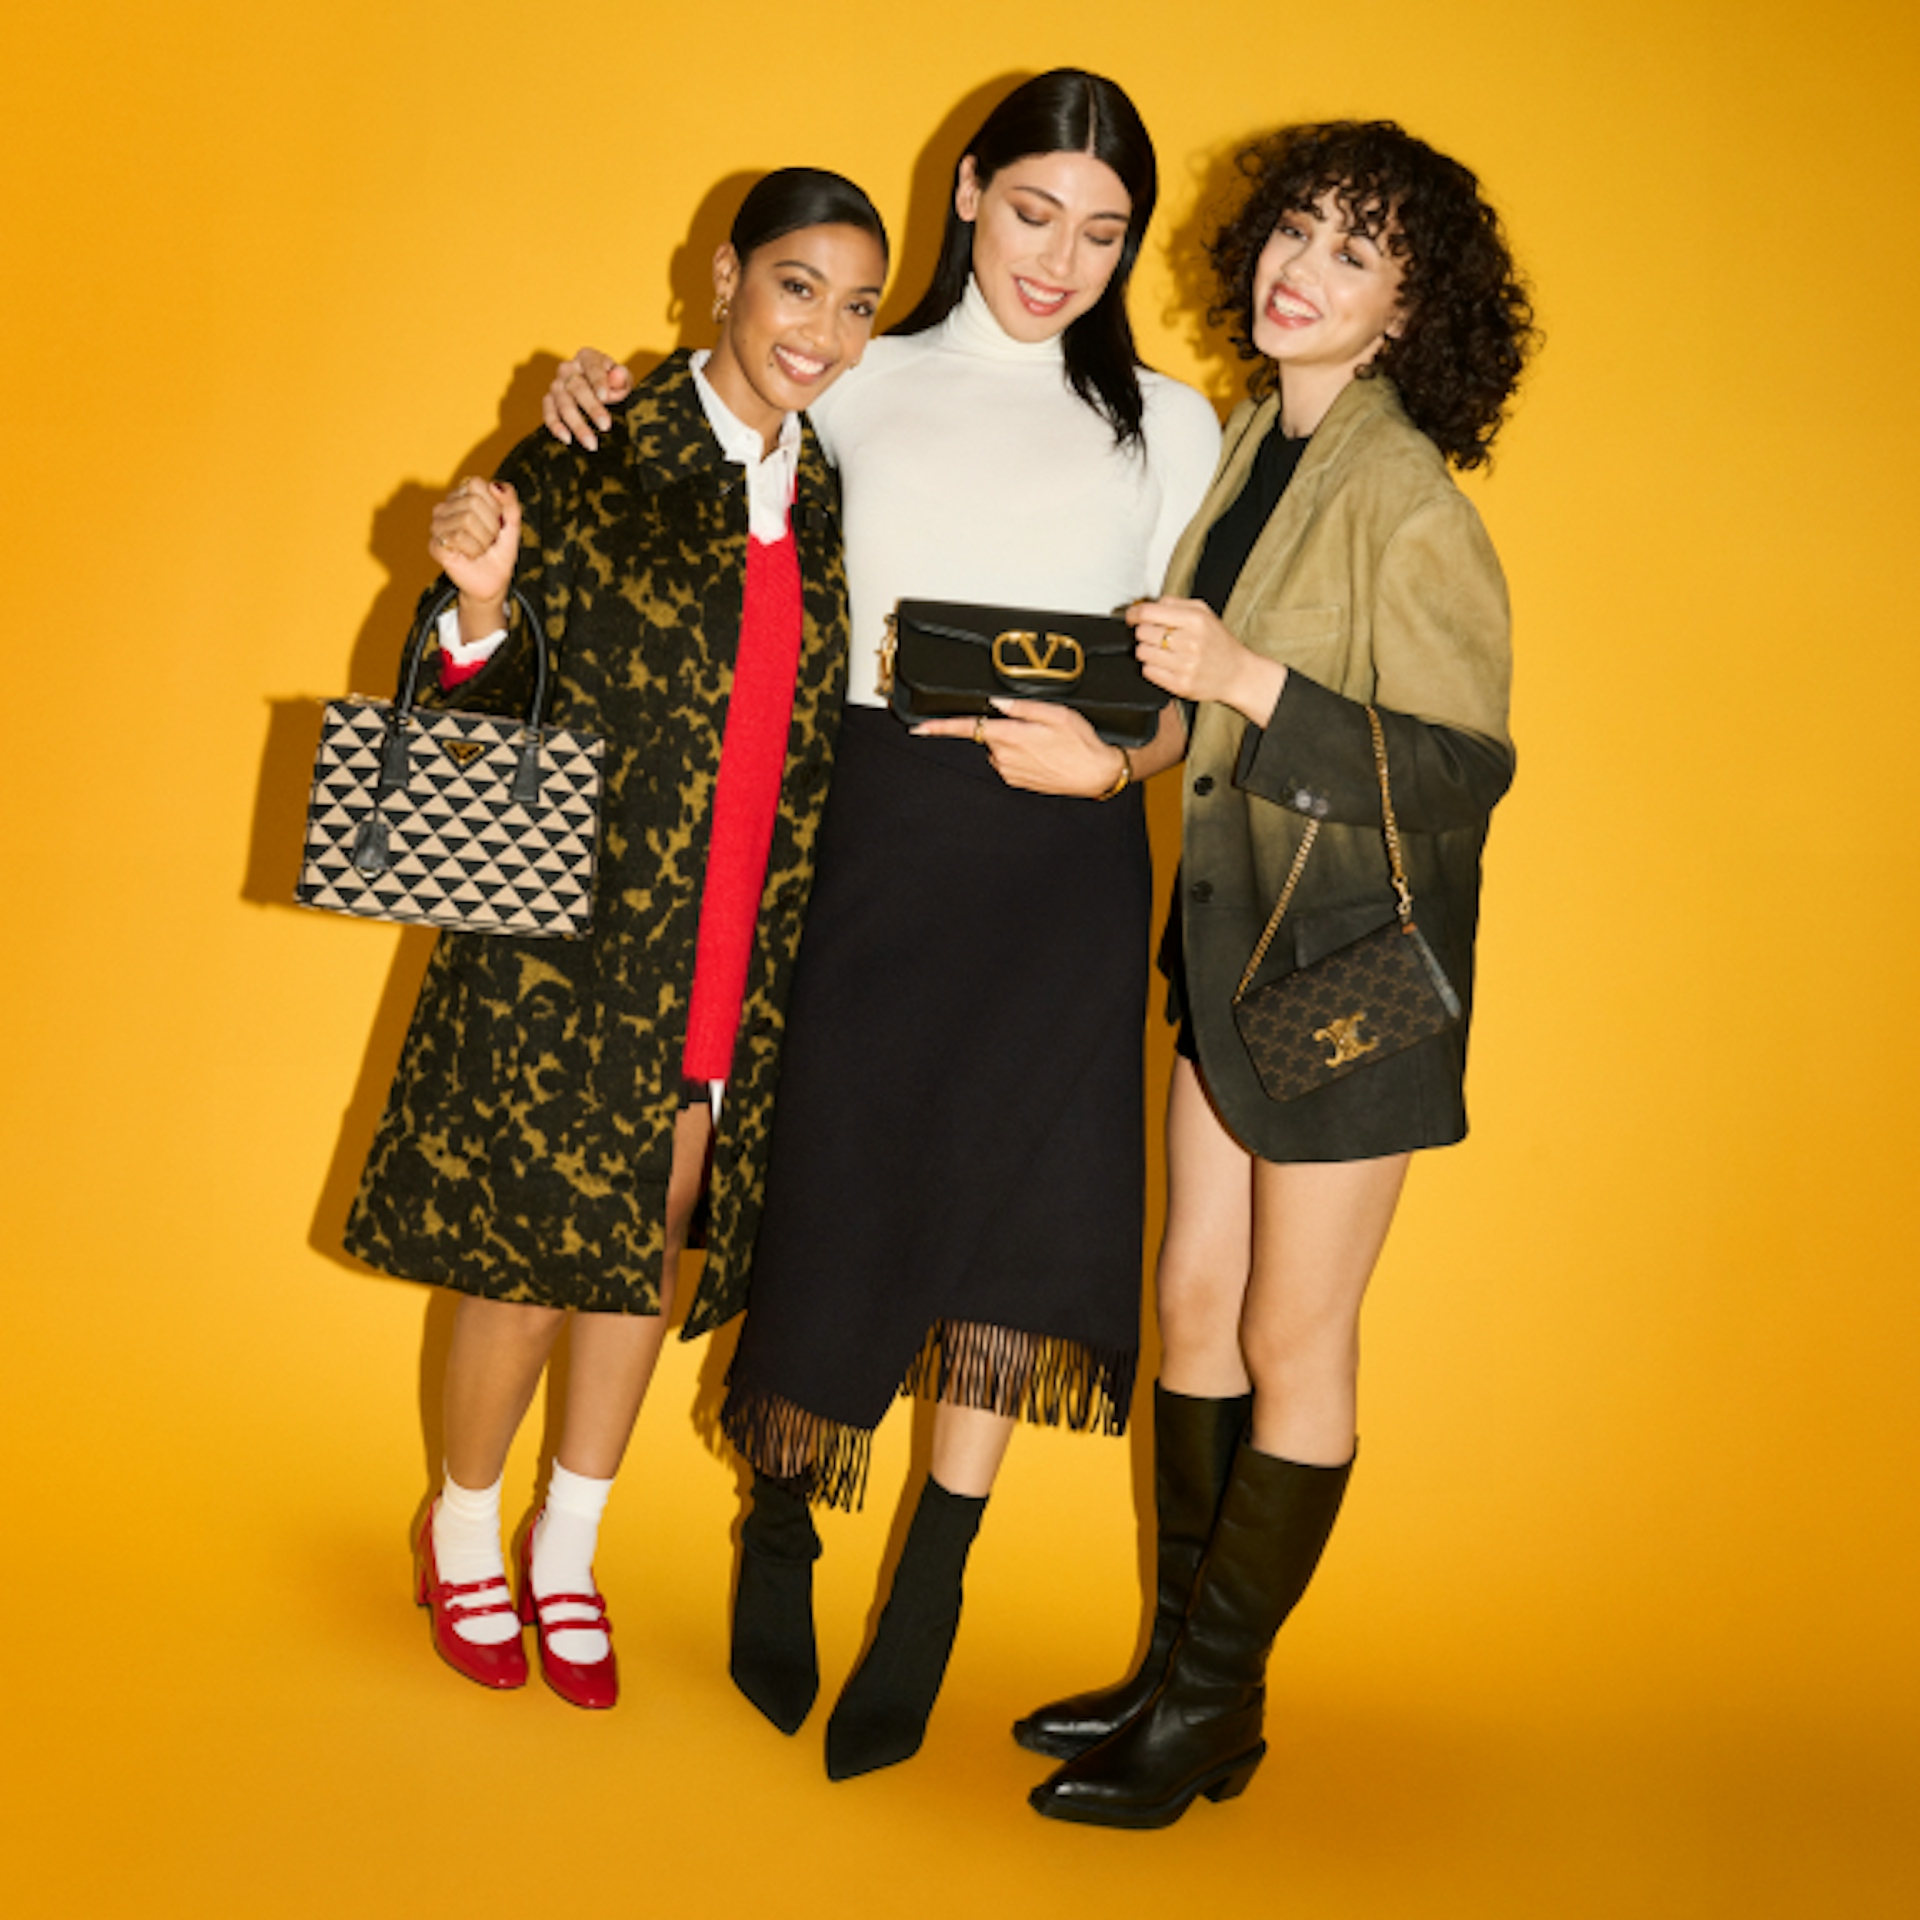 Three women are standing together against a yellow background, smiling and holding designer handbags. They are dressed stylishly: one in a patterned coat with a red dress, another in a white turtleneck and black skirt, and the third in a green jacket and black boots. They exude confidence and elegance.